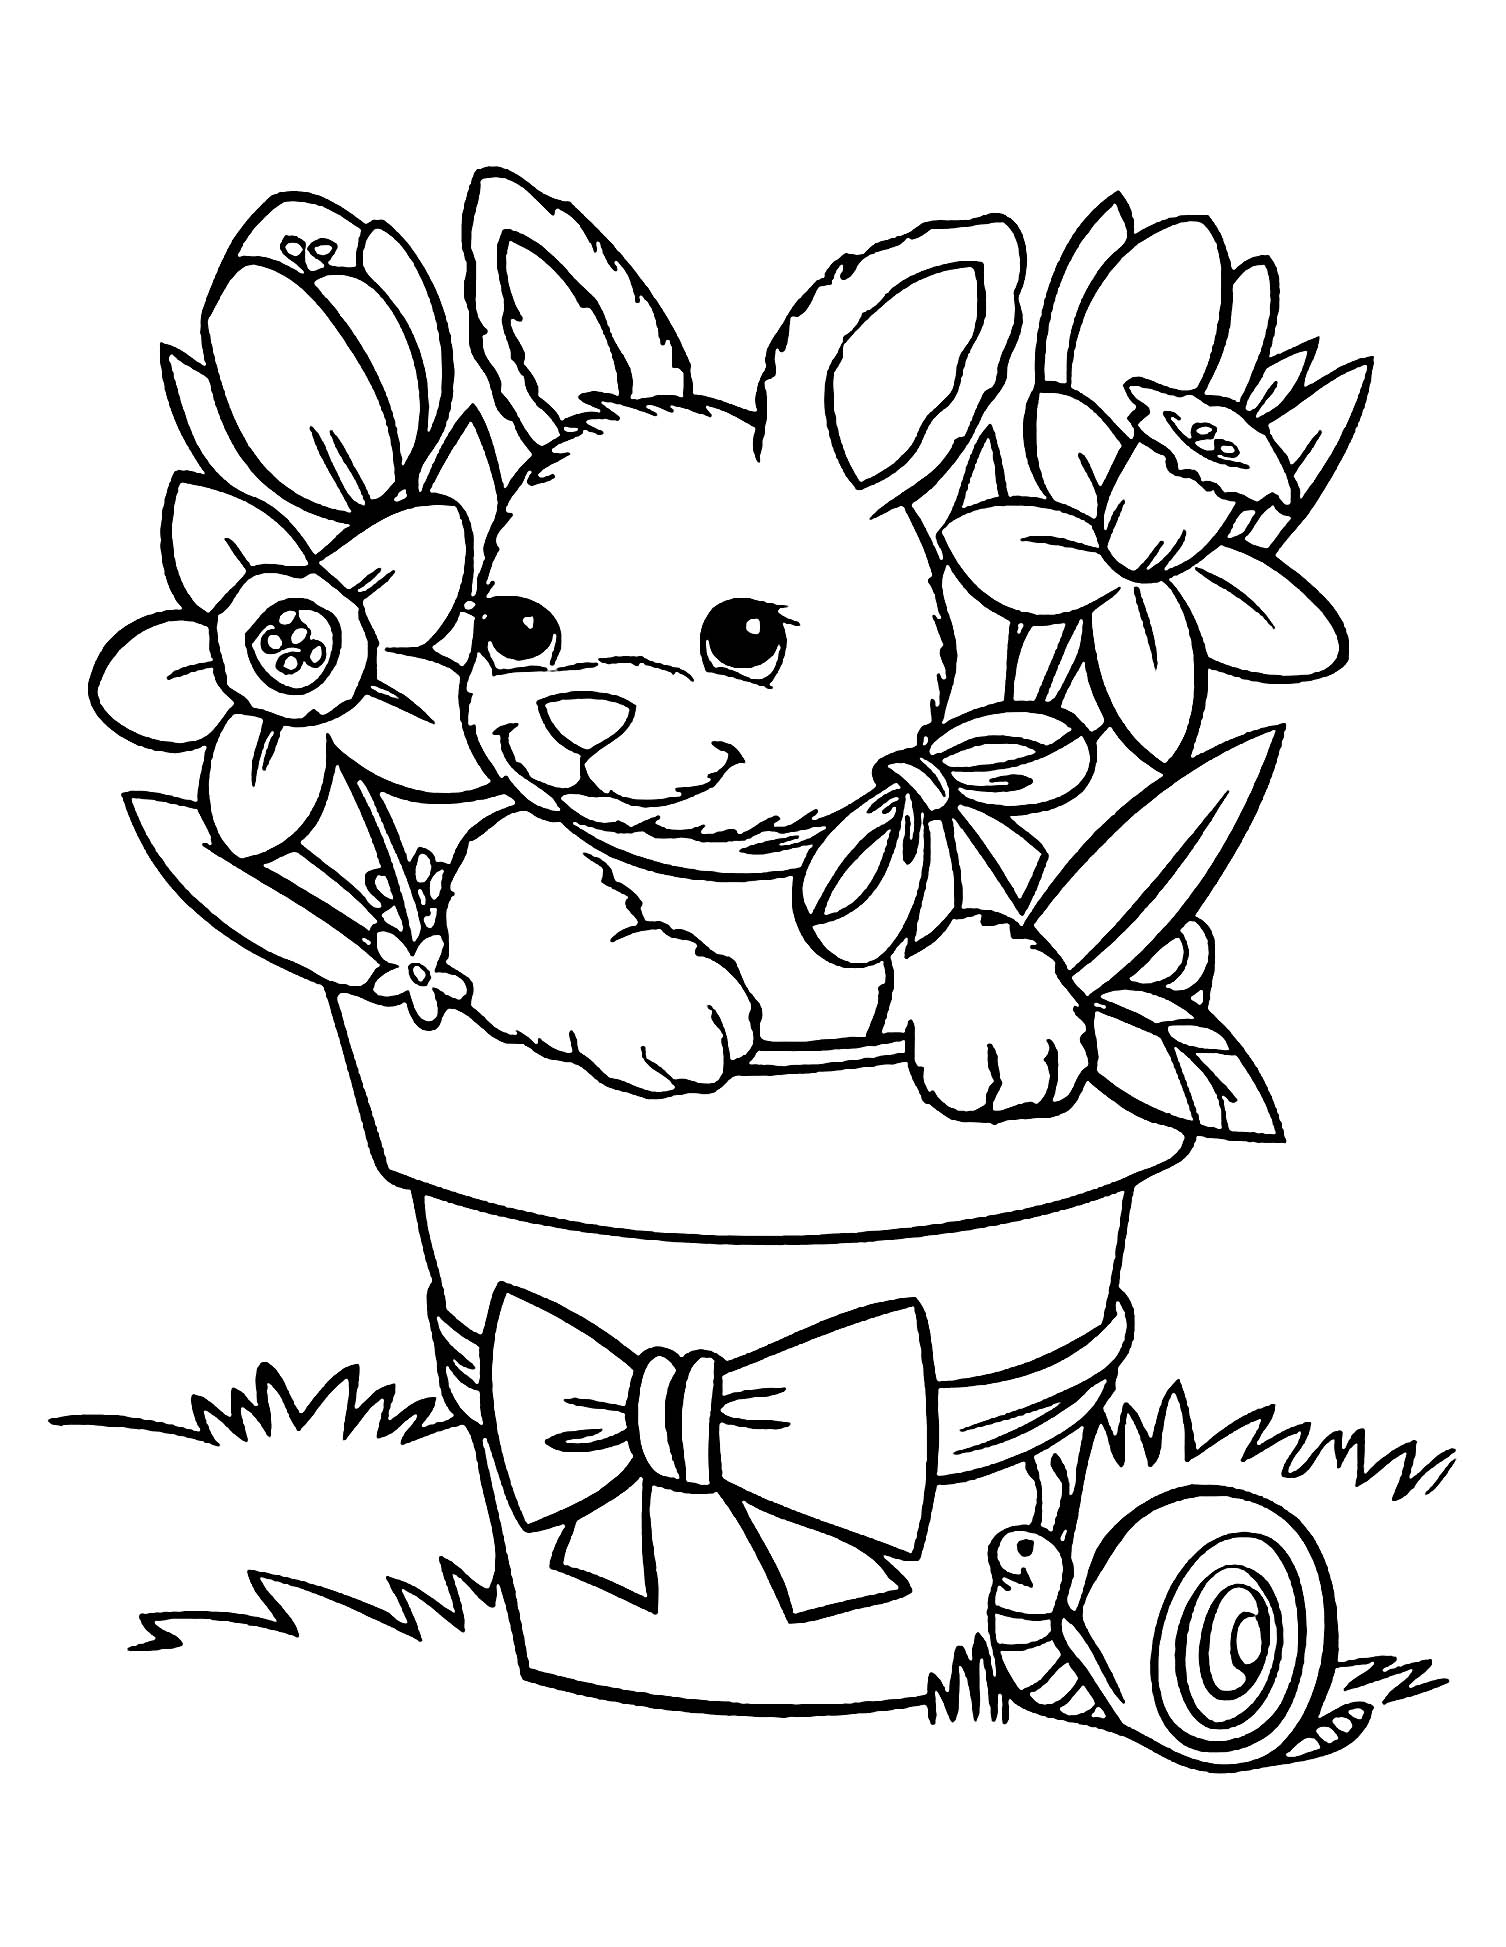 Download Rabbit to download for free - Rabbit Kids Coloring Pages